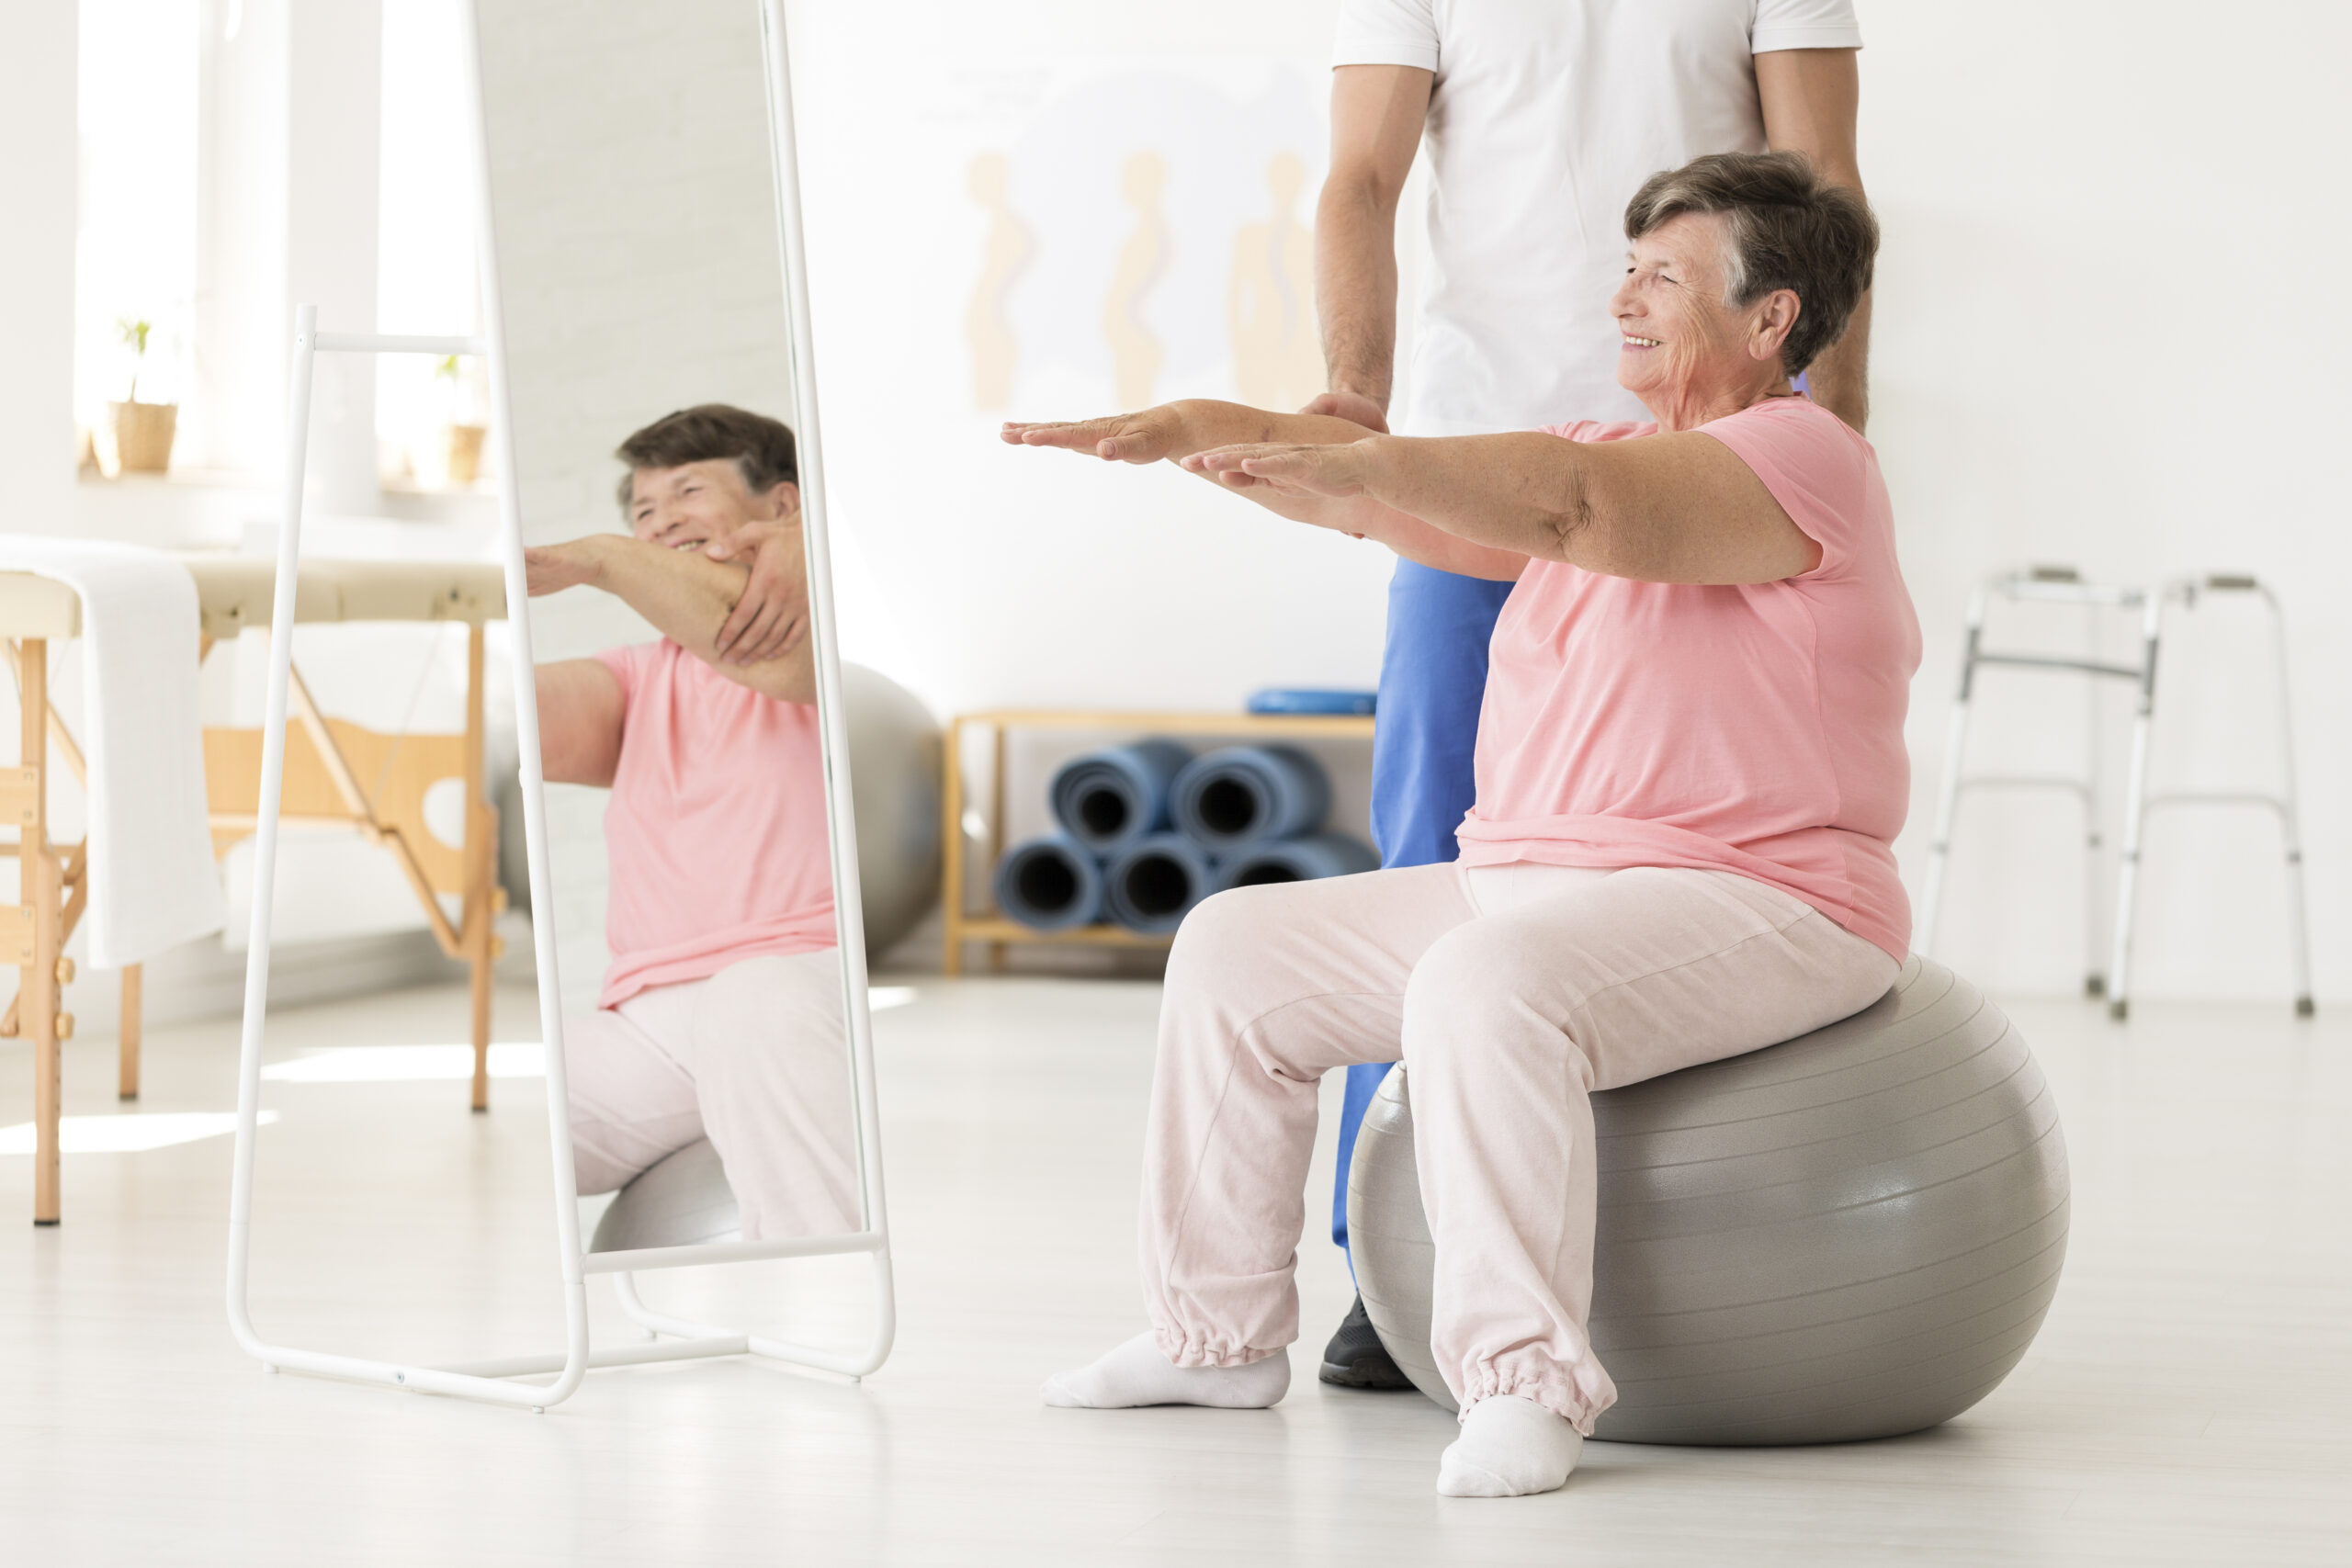 Exercises for Seniors at Home